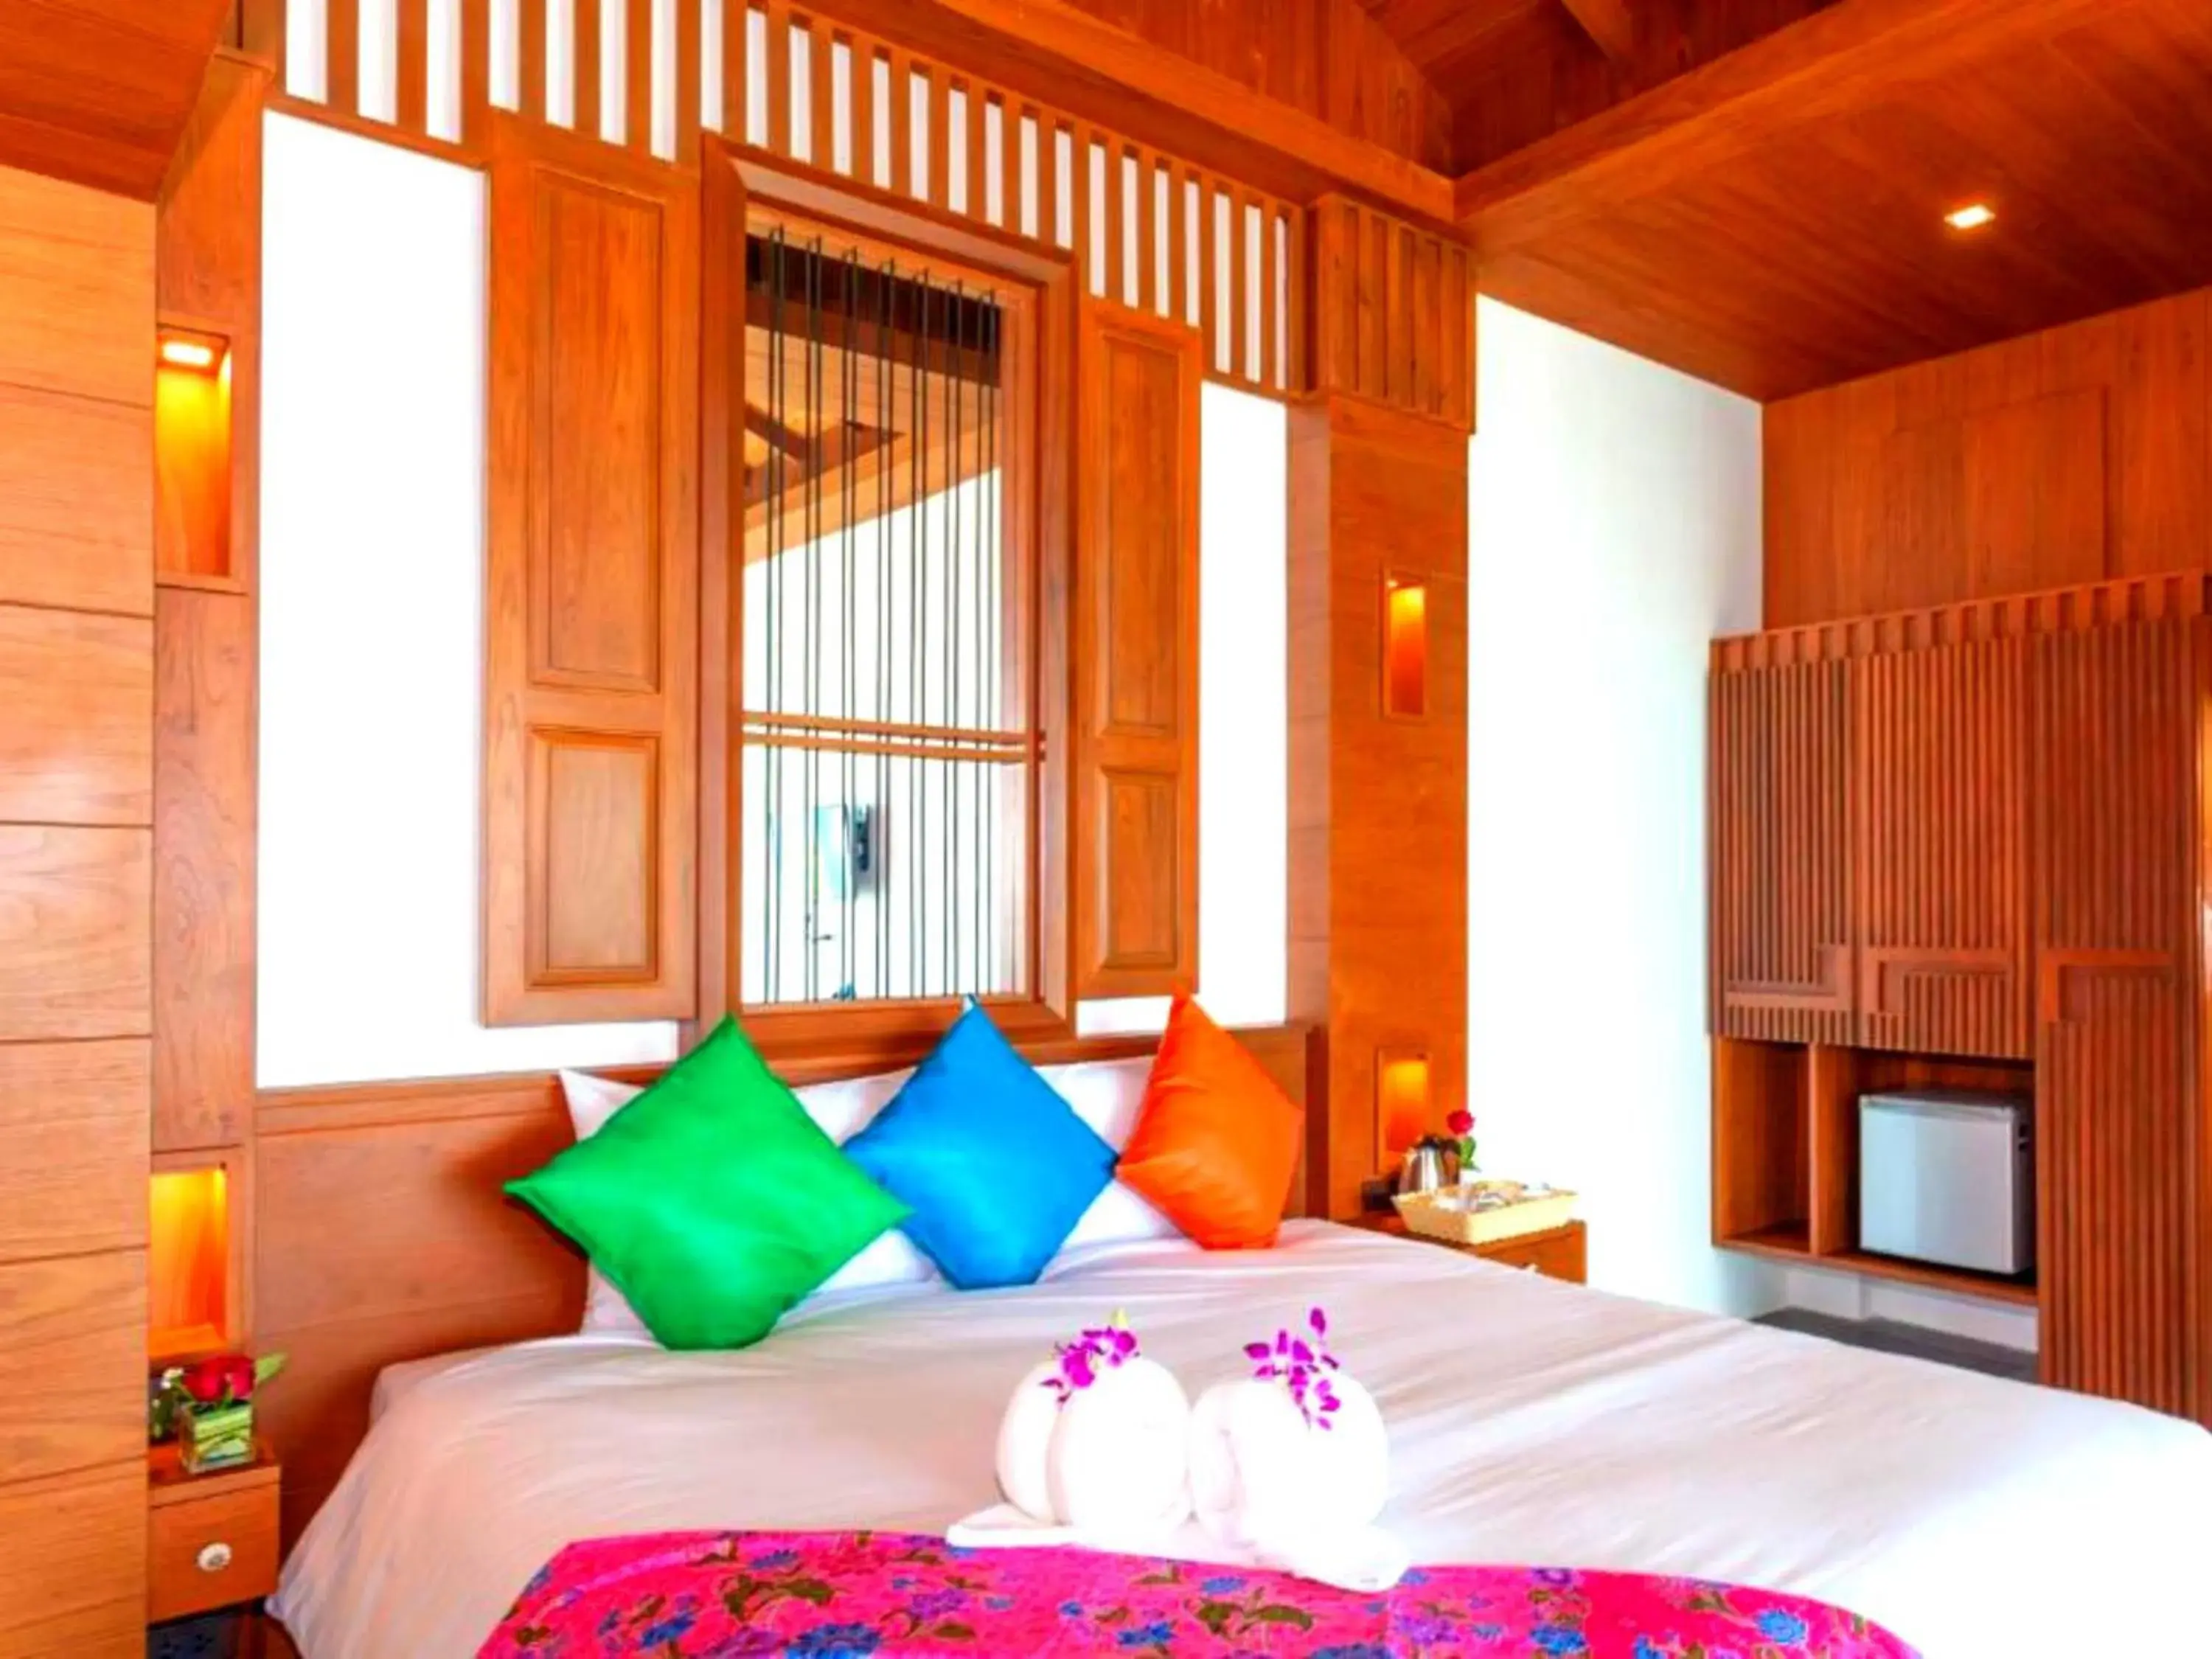 Premium Room with Ocean View (King-size Bed) in The Samui Beach Resort - SHA Plus Certified